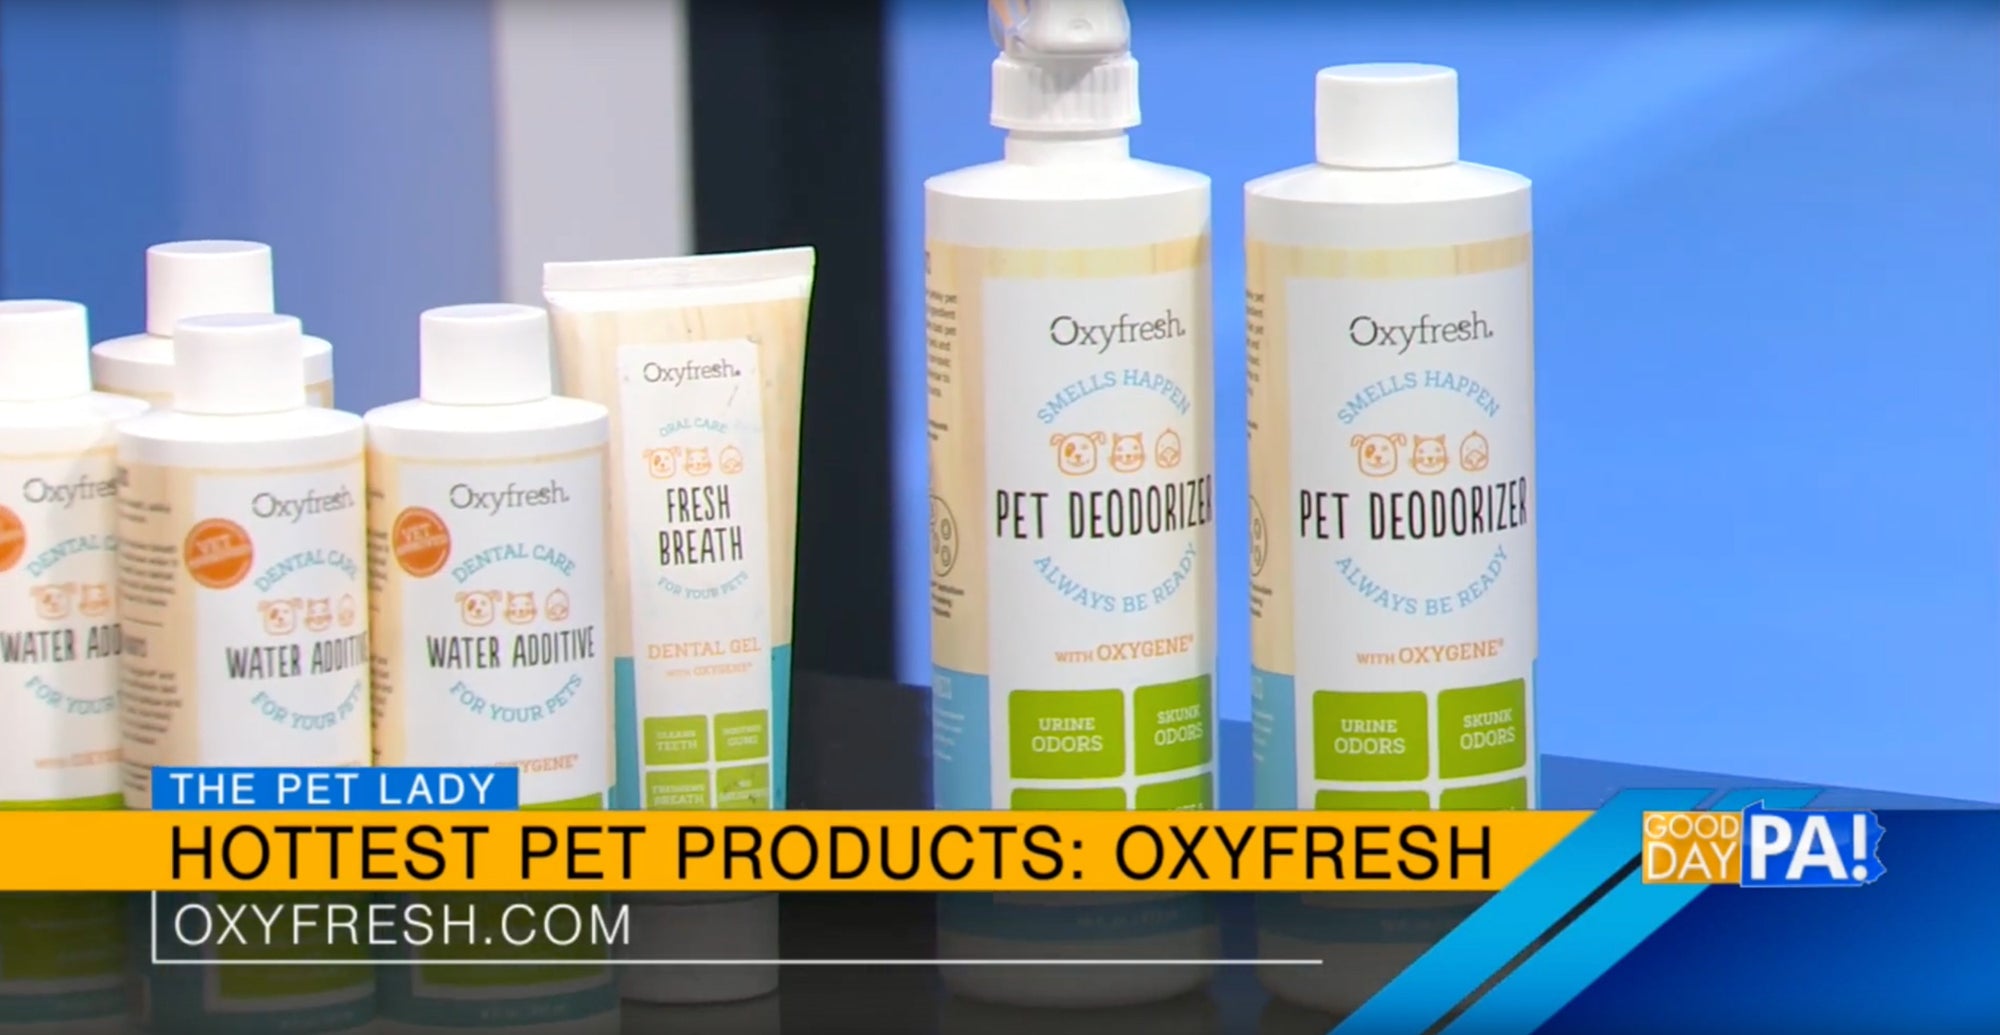 Oxyfresh Pet Care Line Featured on ABC's Good Day PA